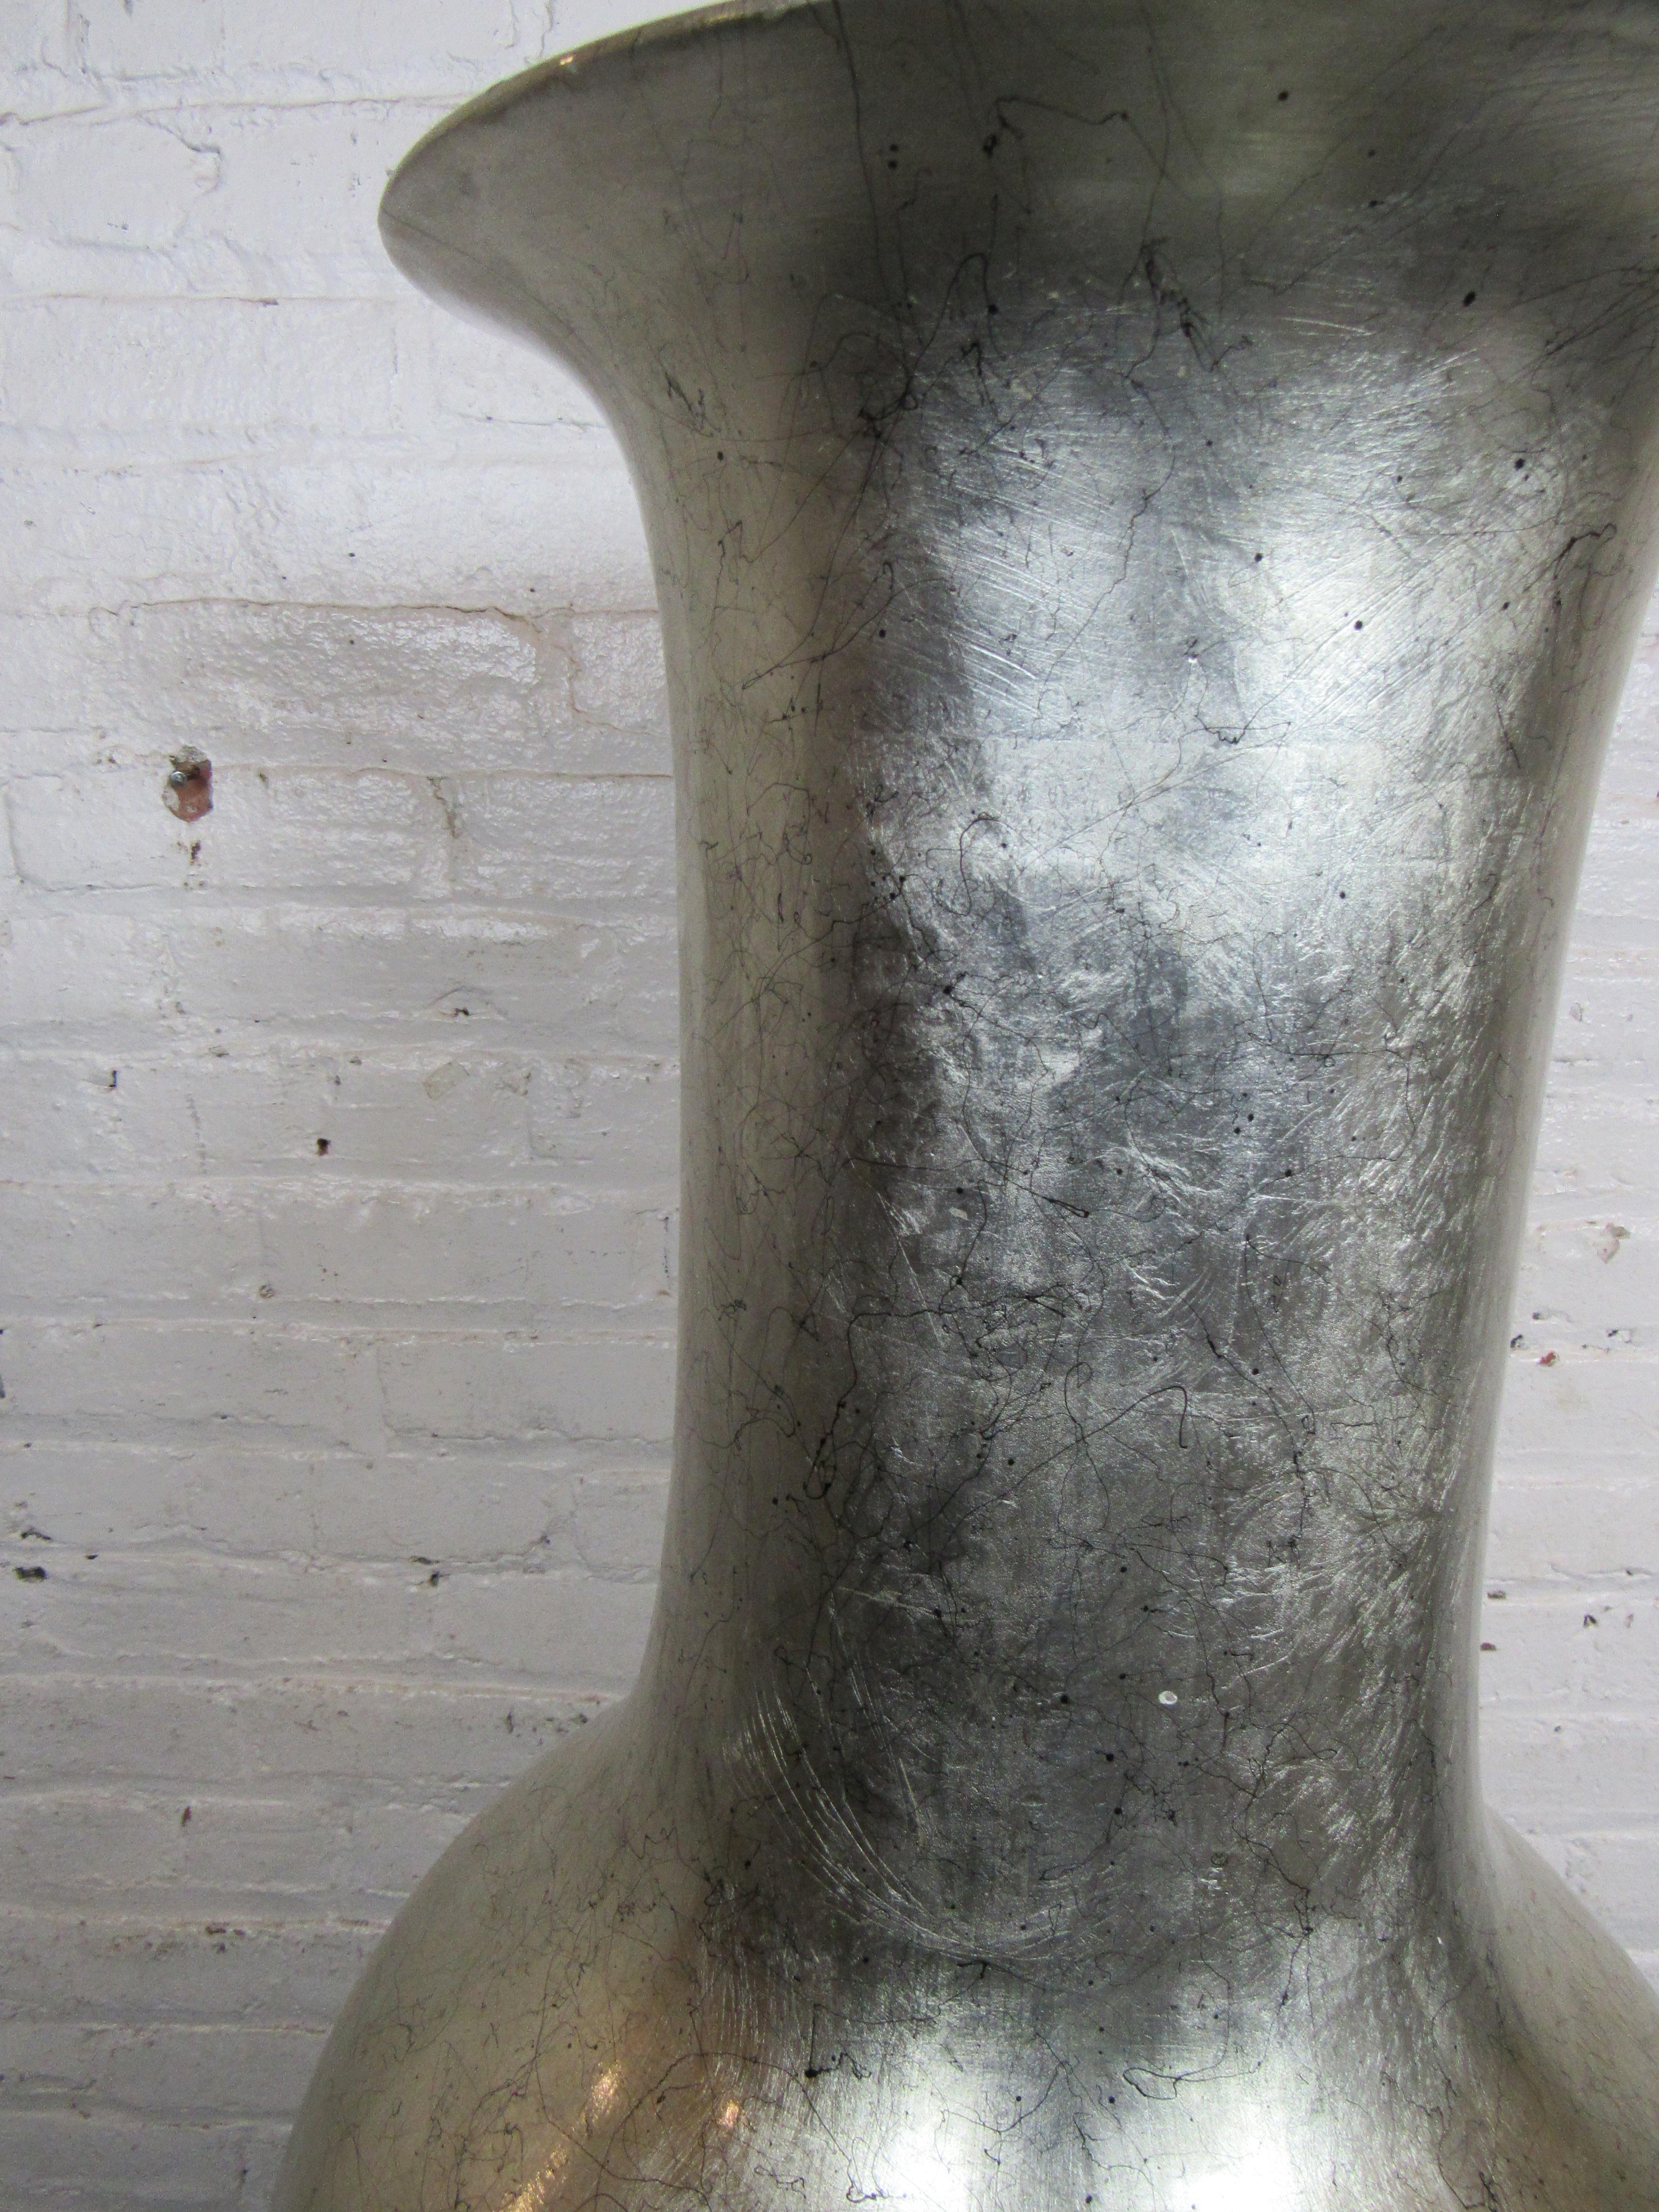 This striking bamboo floor vase in silver and black speckle paint. Sitting over five feet tall.
Please confirm location NY or NJ